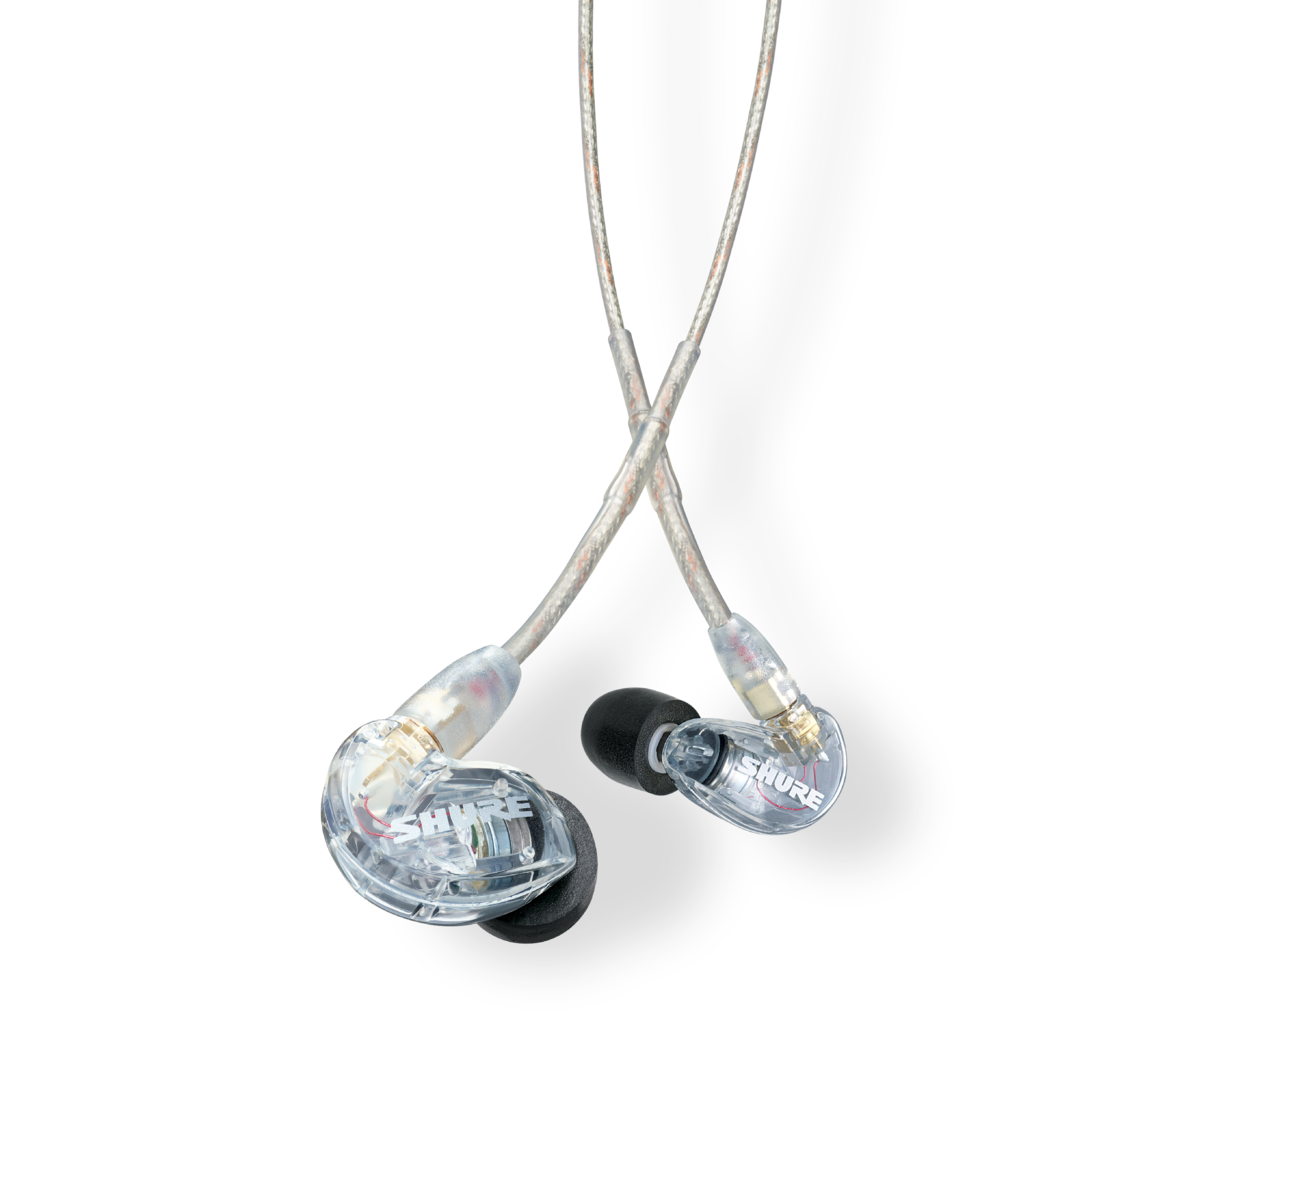 SE215-CL Sound Isolating Earphones, Clear